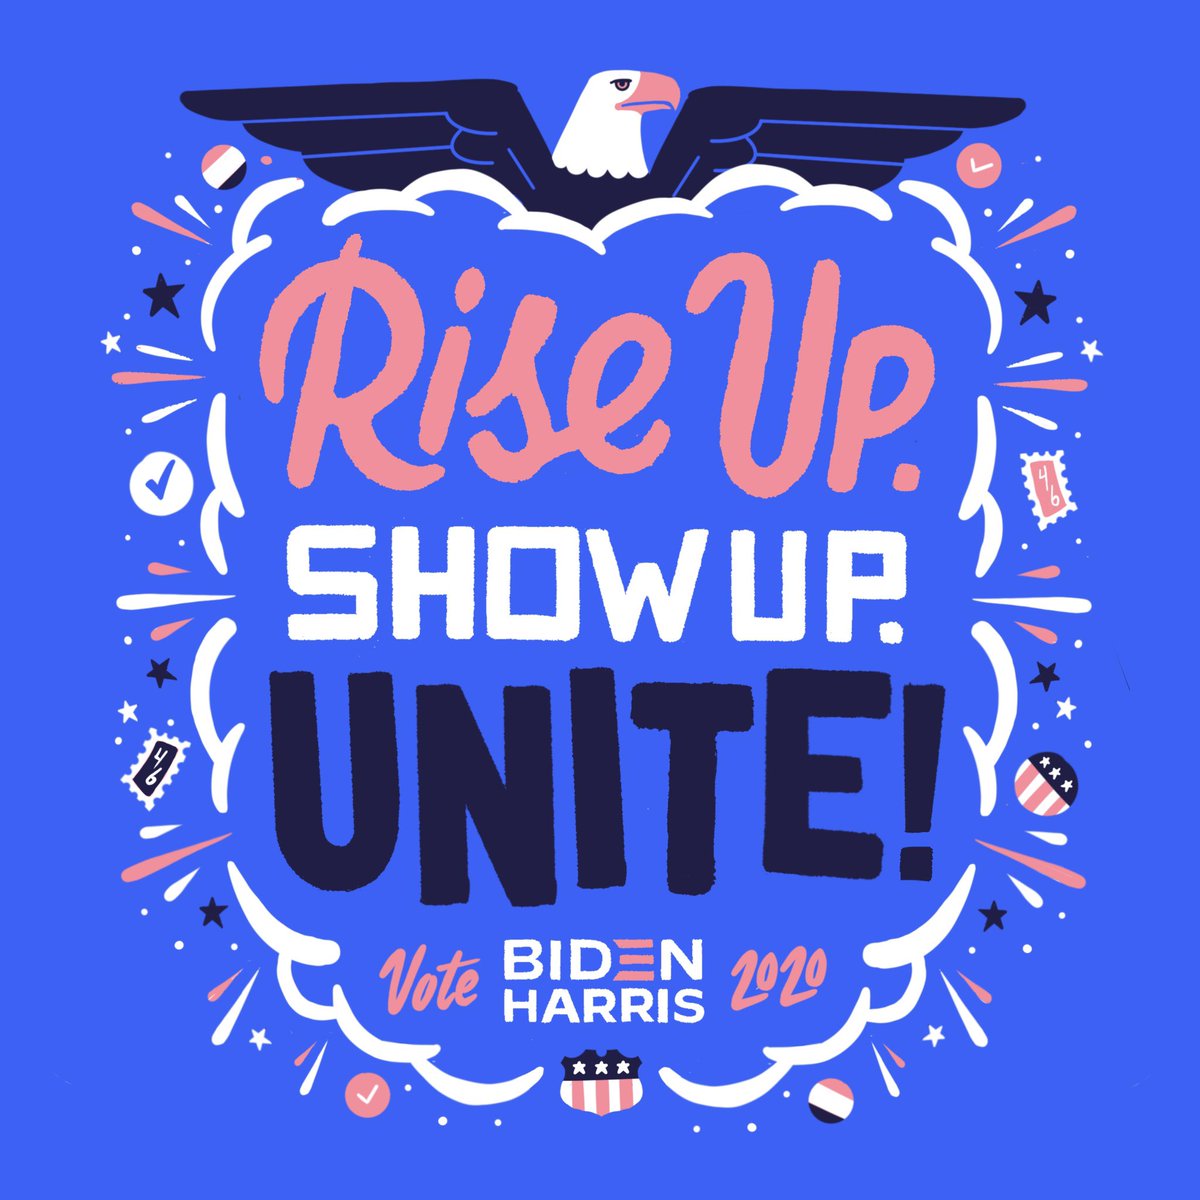 Made one more piece in showing my support for #riseupshowupunite. The elections are coming up quick! So make sure to register and vote.